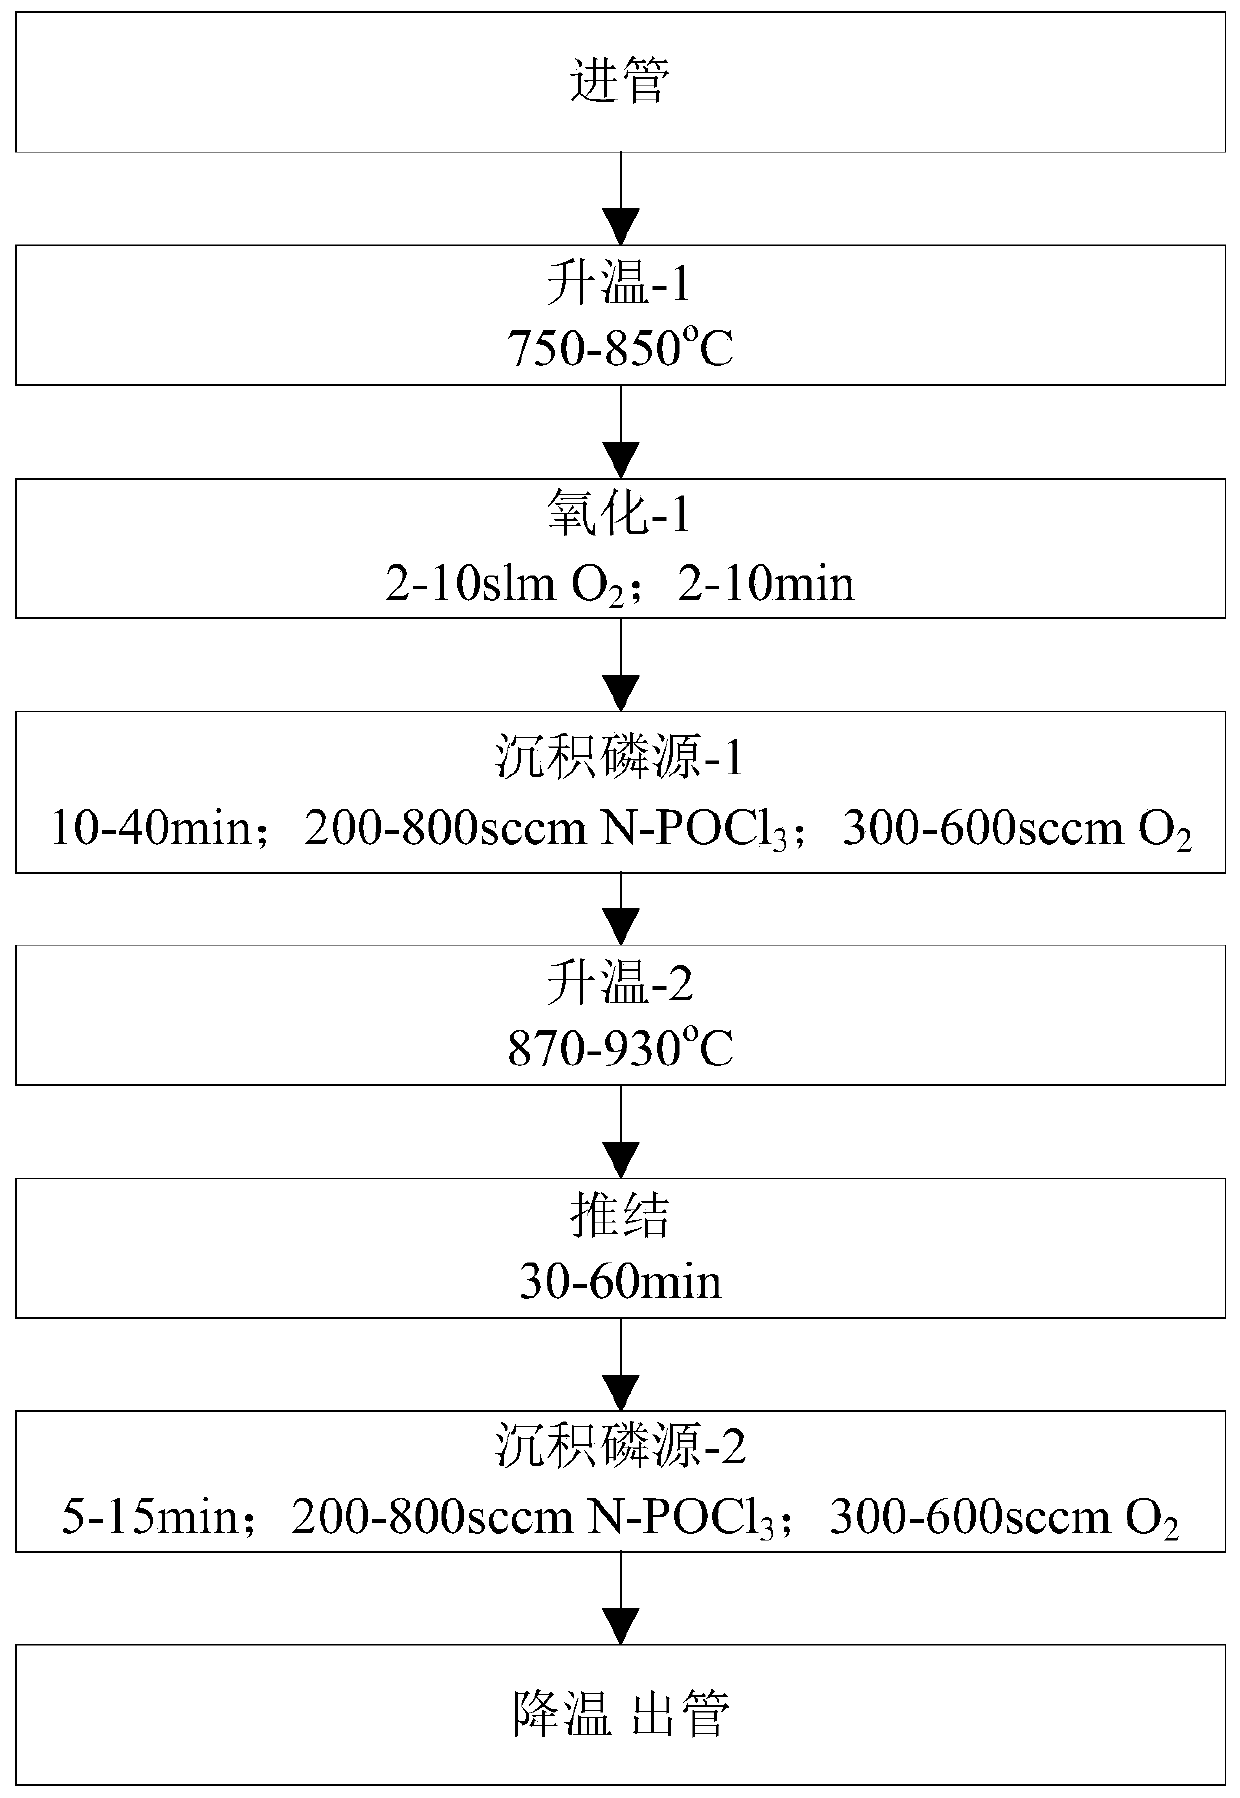 High-quality phosphorus diffusion method for matching selective etching of HF/HNO3 system